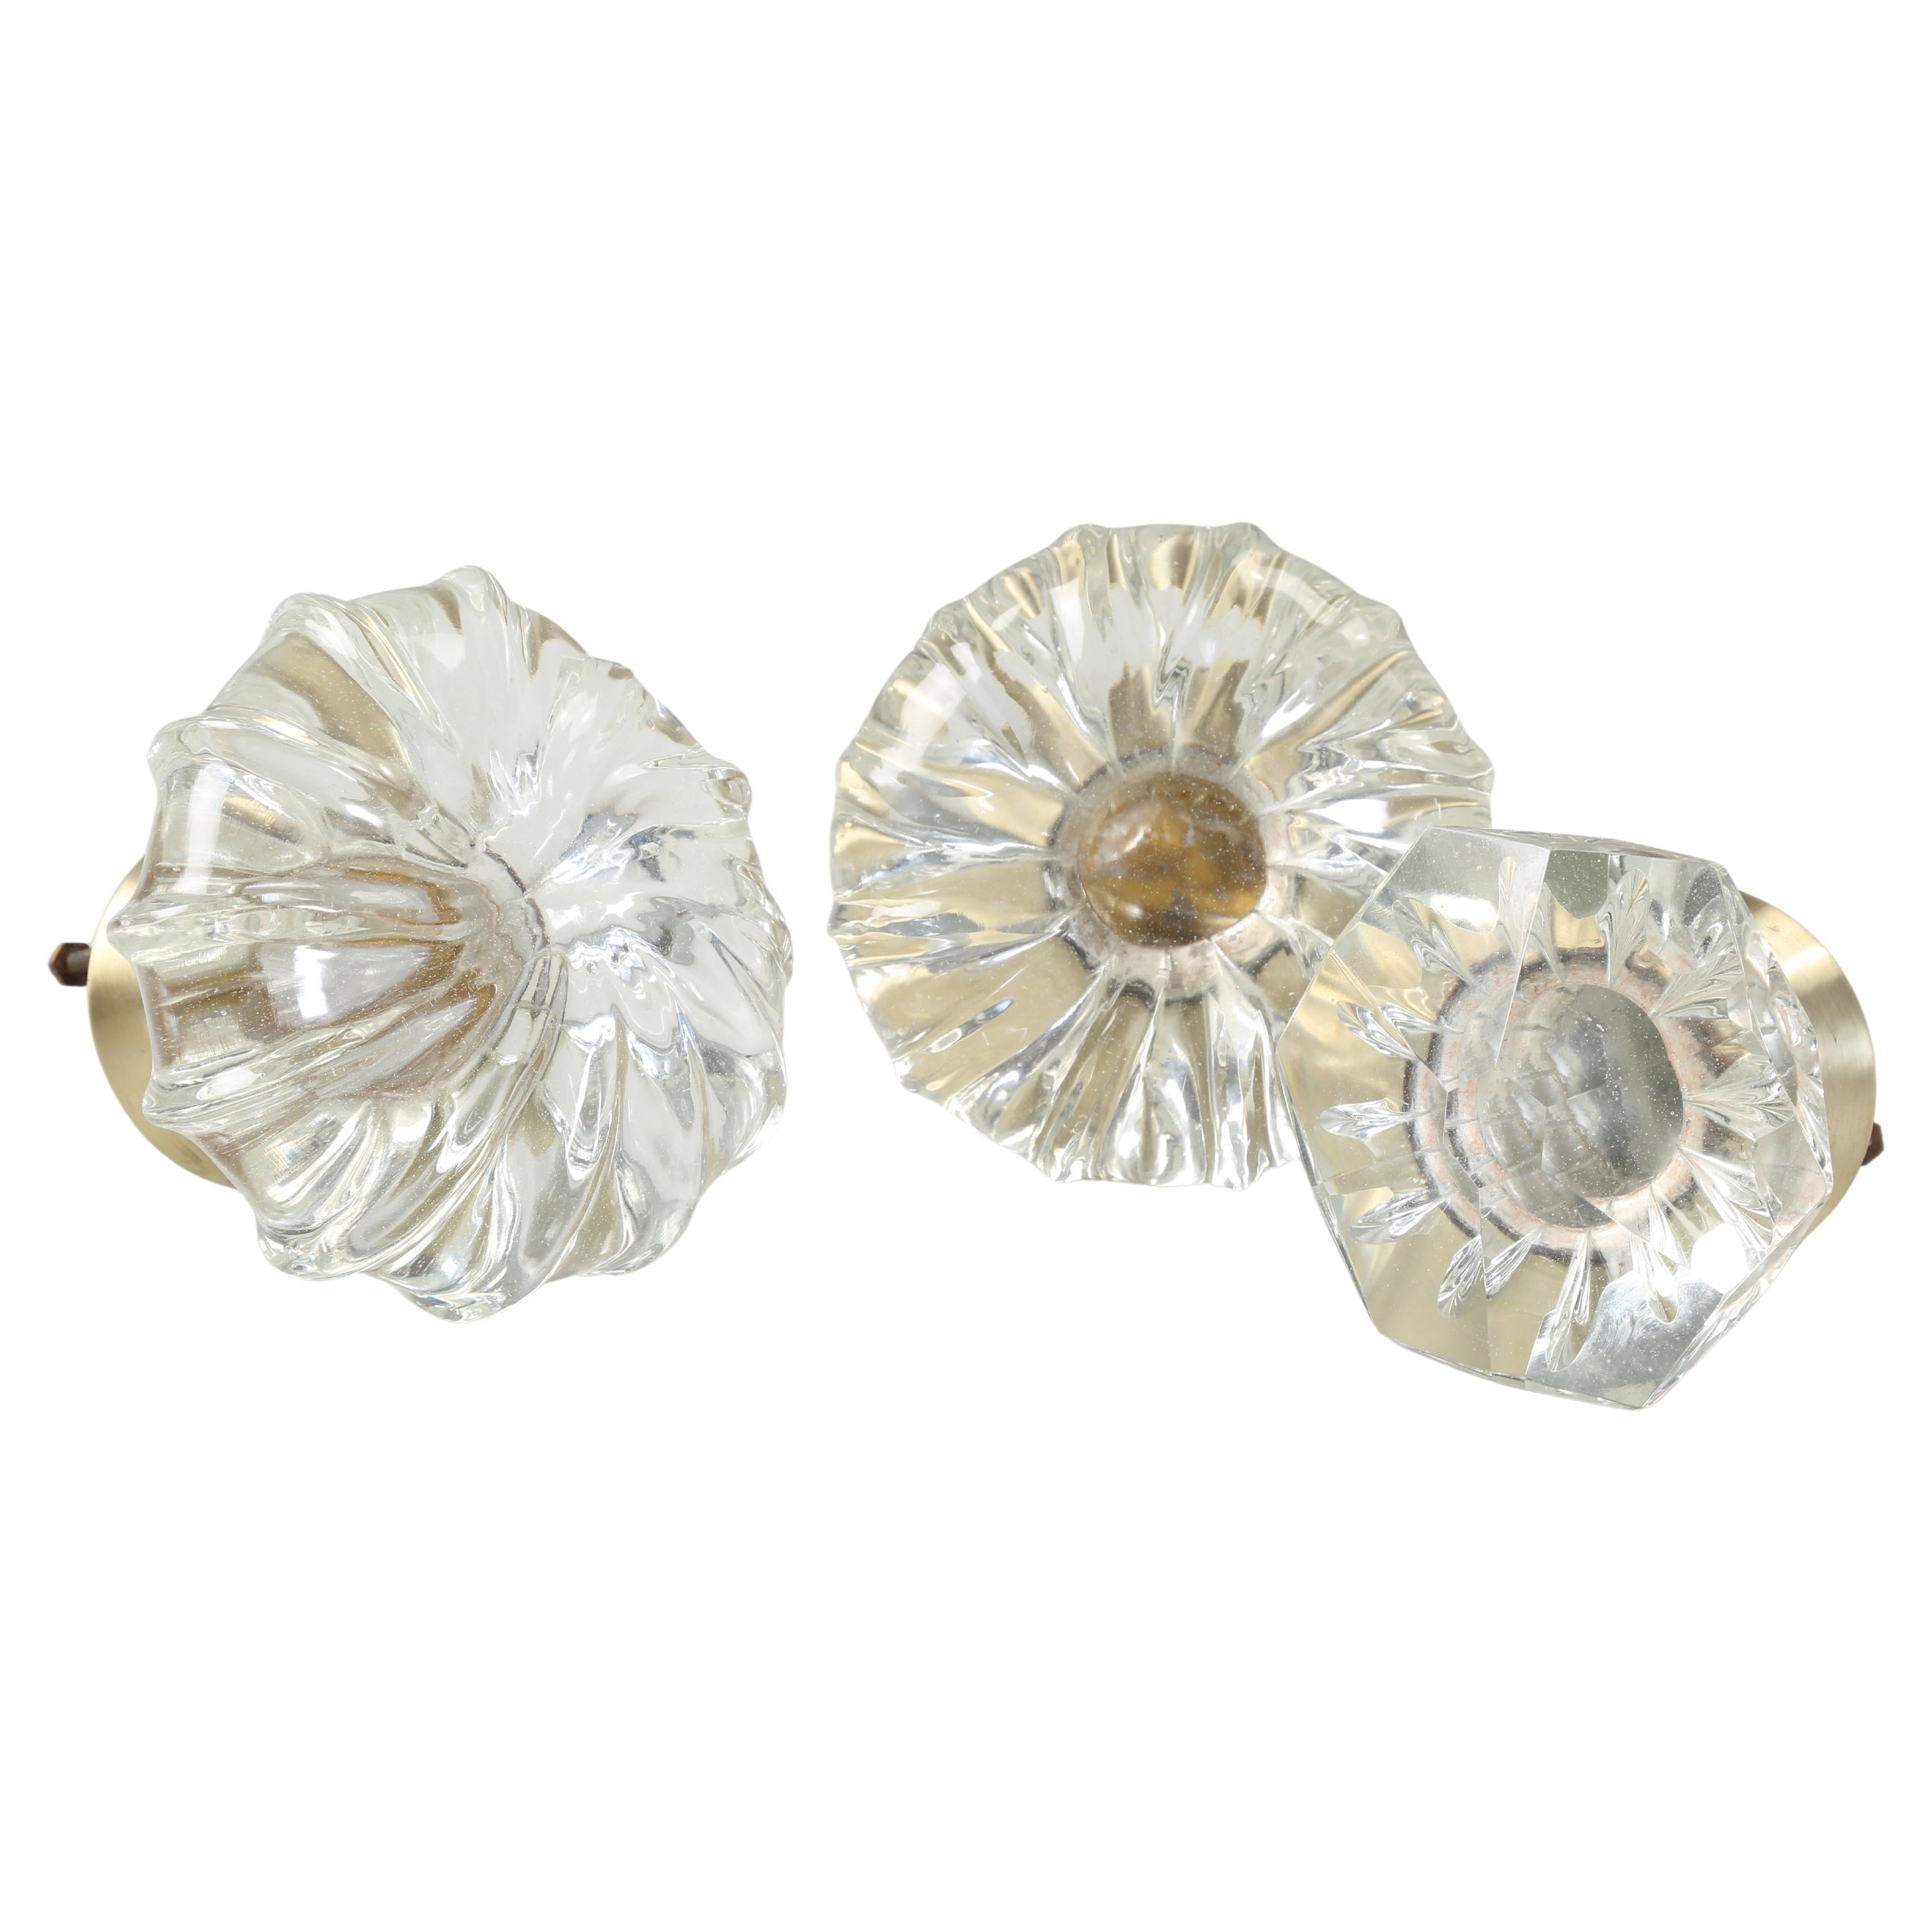 Antique Crystal (3) Pieces Curtain Tie-Backs or Large Crystal Door Knobs French For Sale